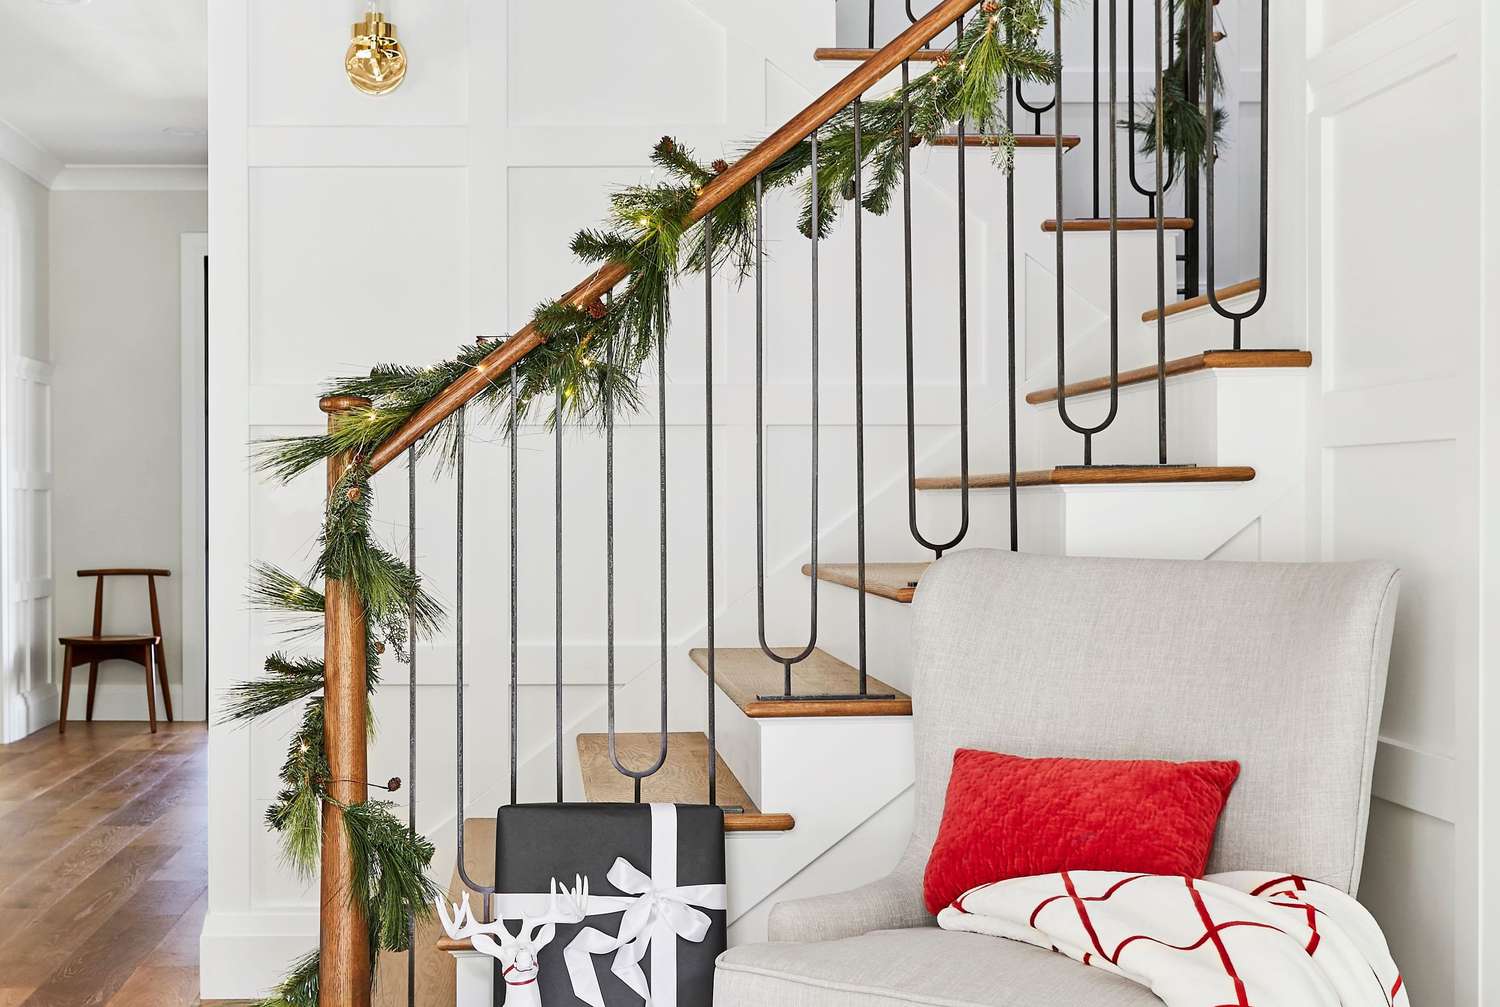 21 Unique Christmas Entryway Decor Ideas to Bring in the Holiday Cheer